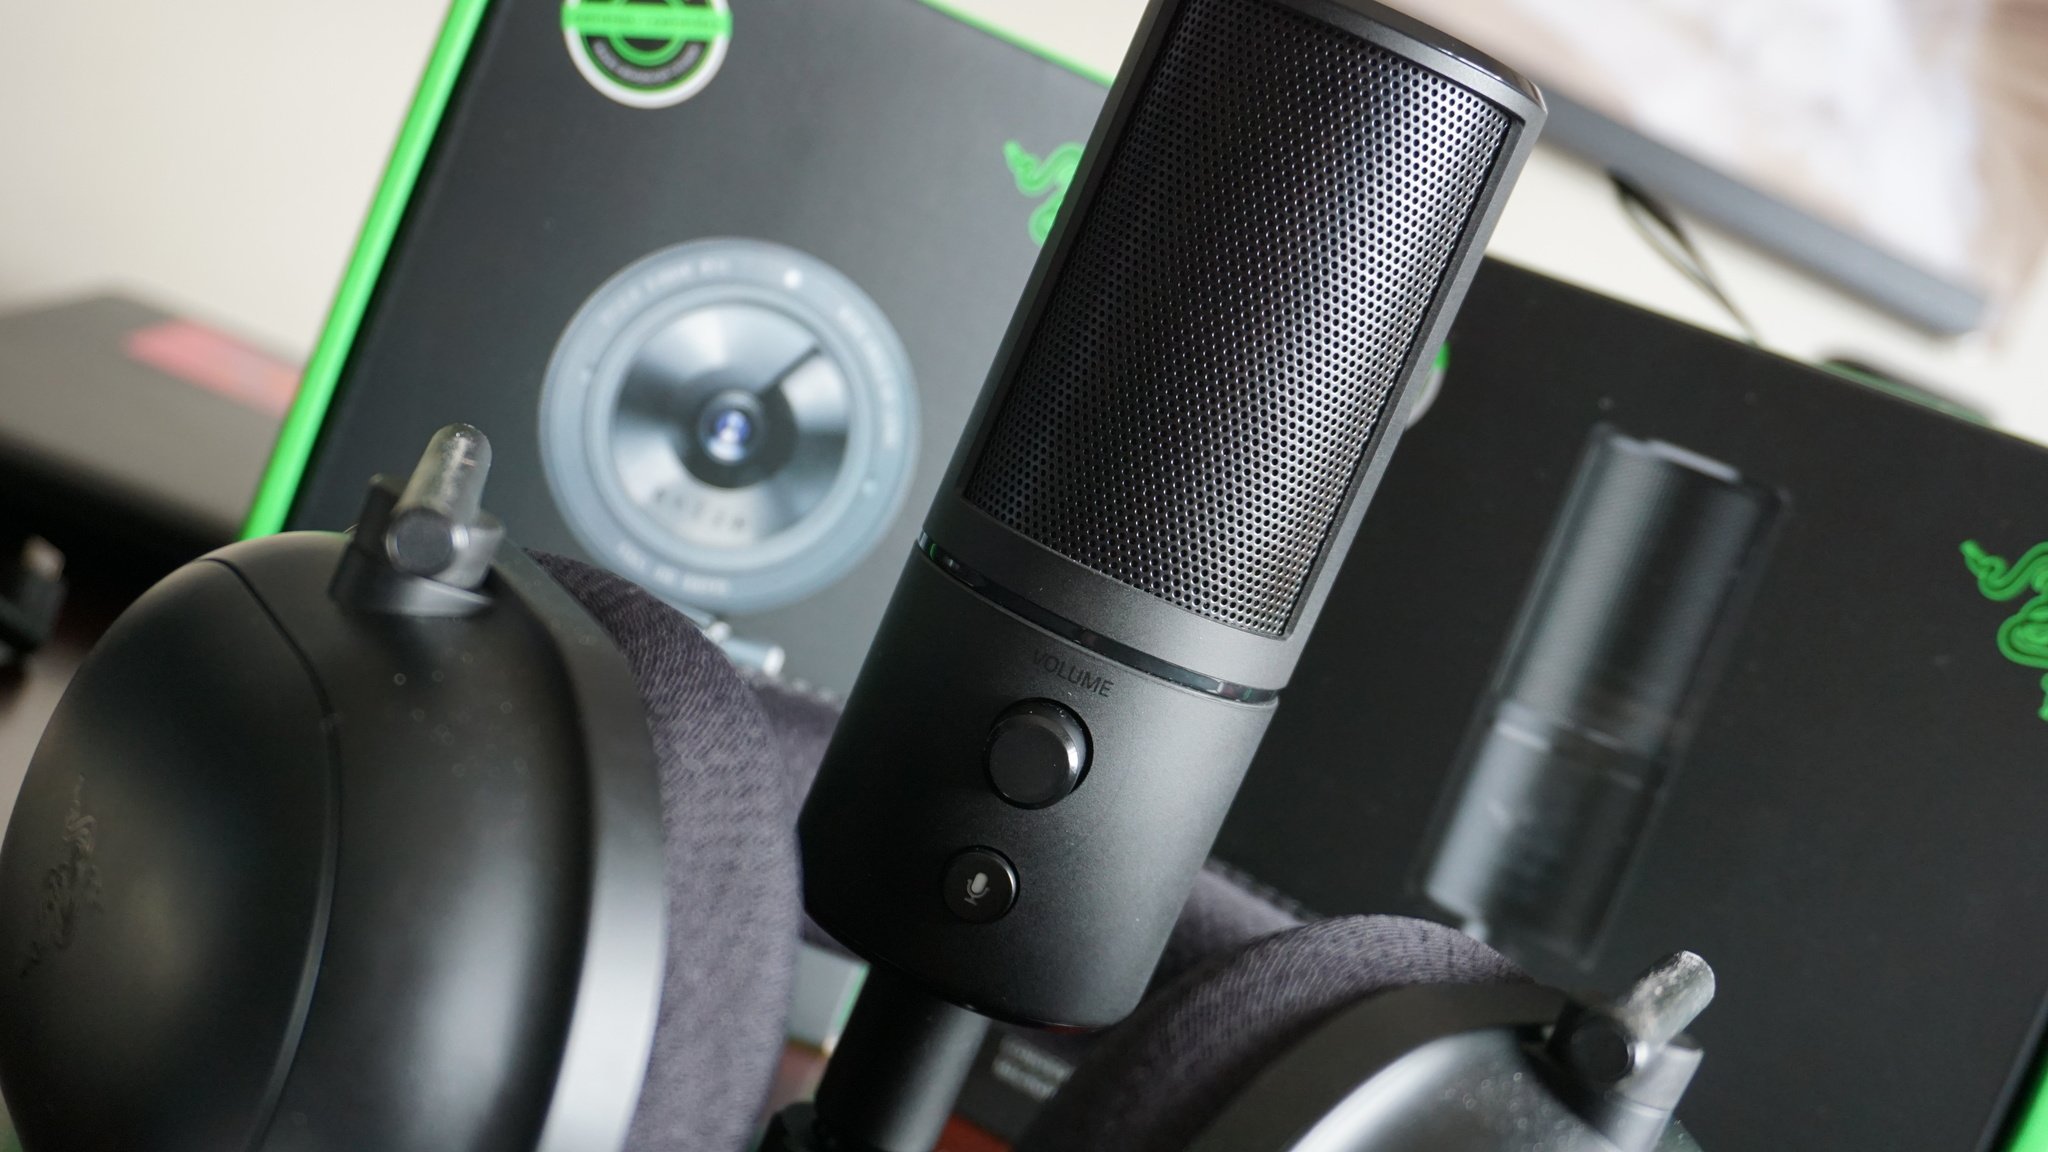 Razer Seiren X Microphone Review Doesn T Show Its Age Android Central